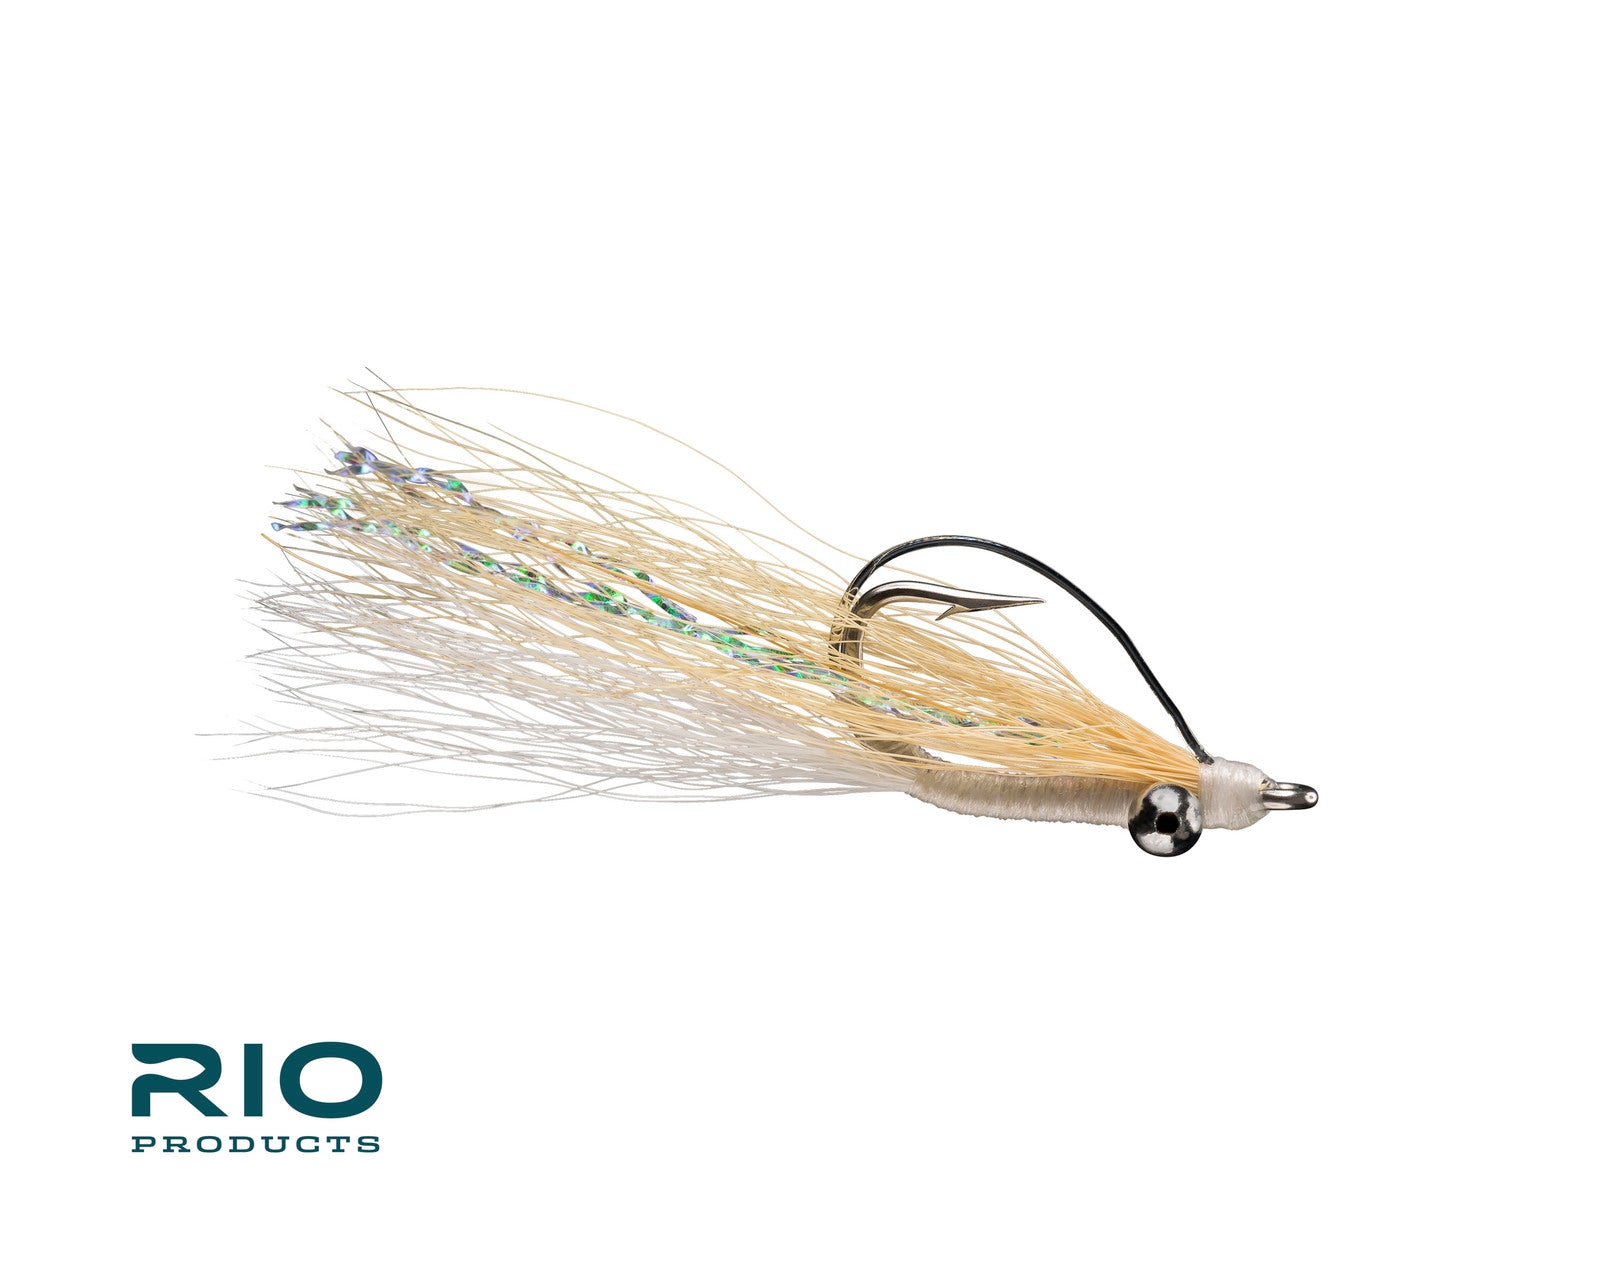 RIO's Skinny Water Clouser Minnow Weedless in Tan & White